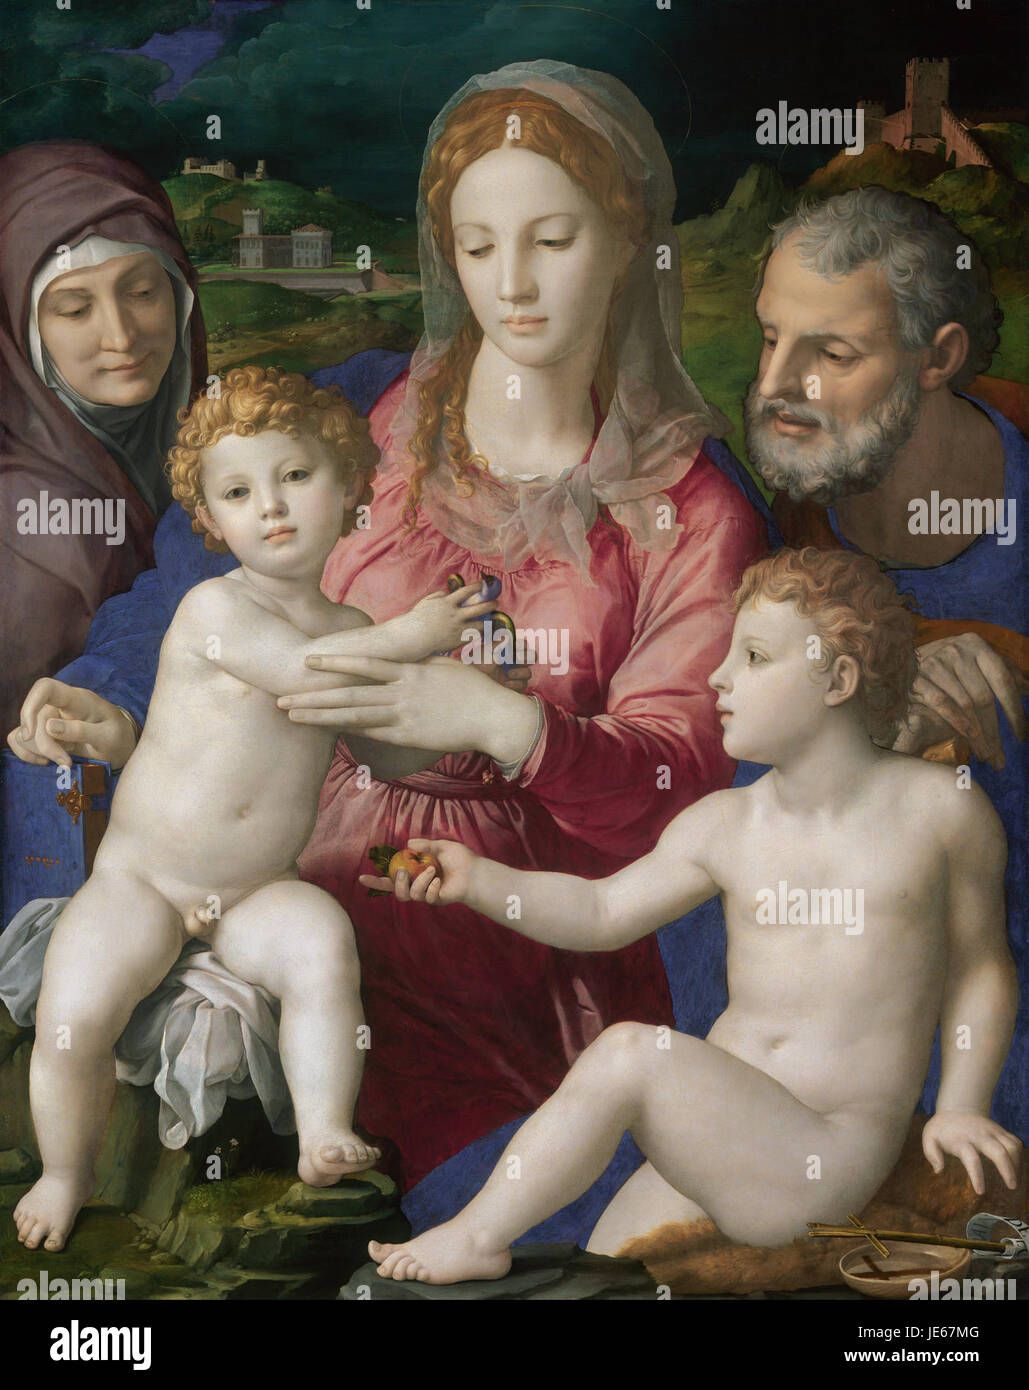 Agnolo di Cosimo, called Bronzino - Holy Family with St. Anne and the Infant St. John - Stock Photo